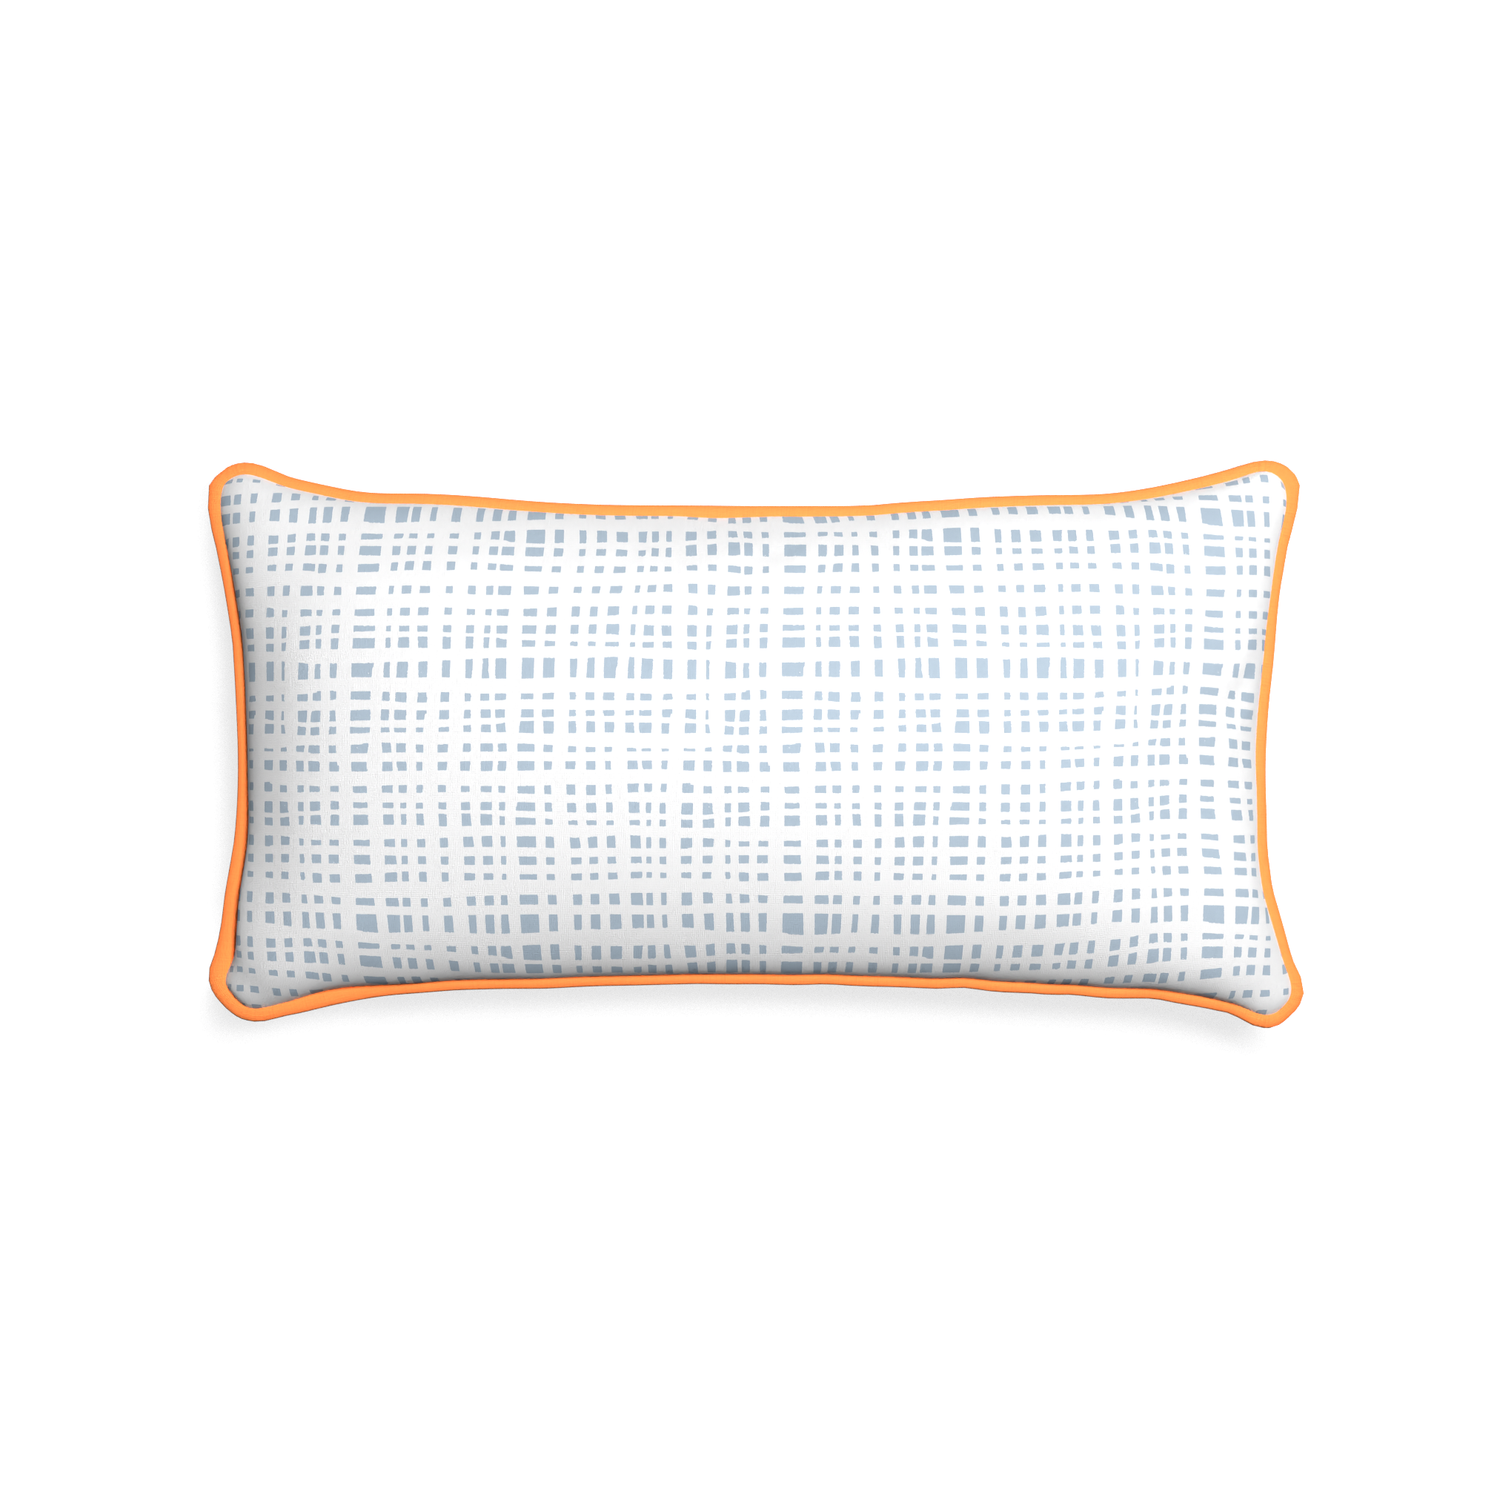 Midi-lumbar ginger custom plaid sky bluepillow with clementine piping on white background